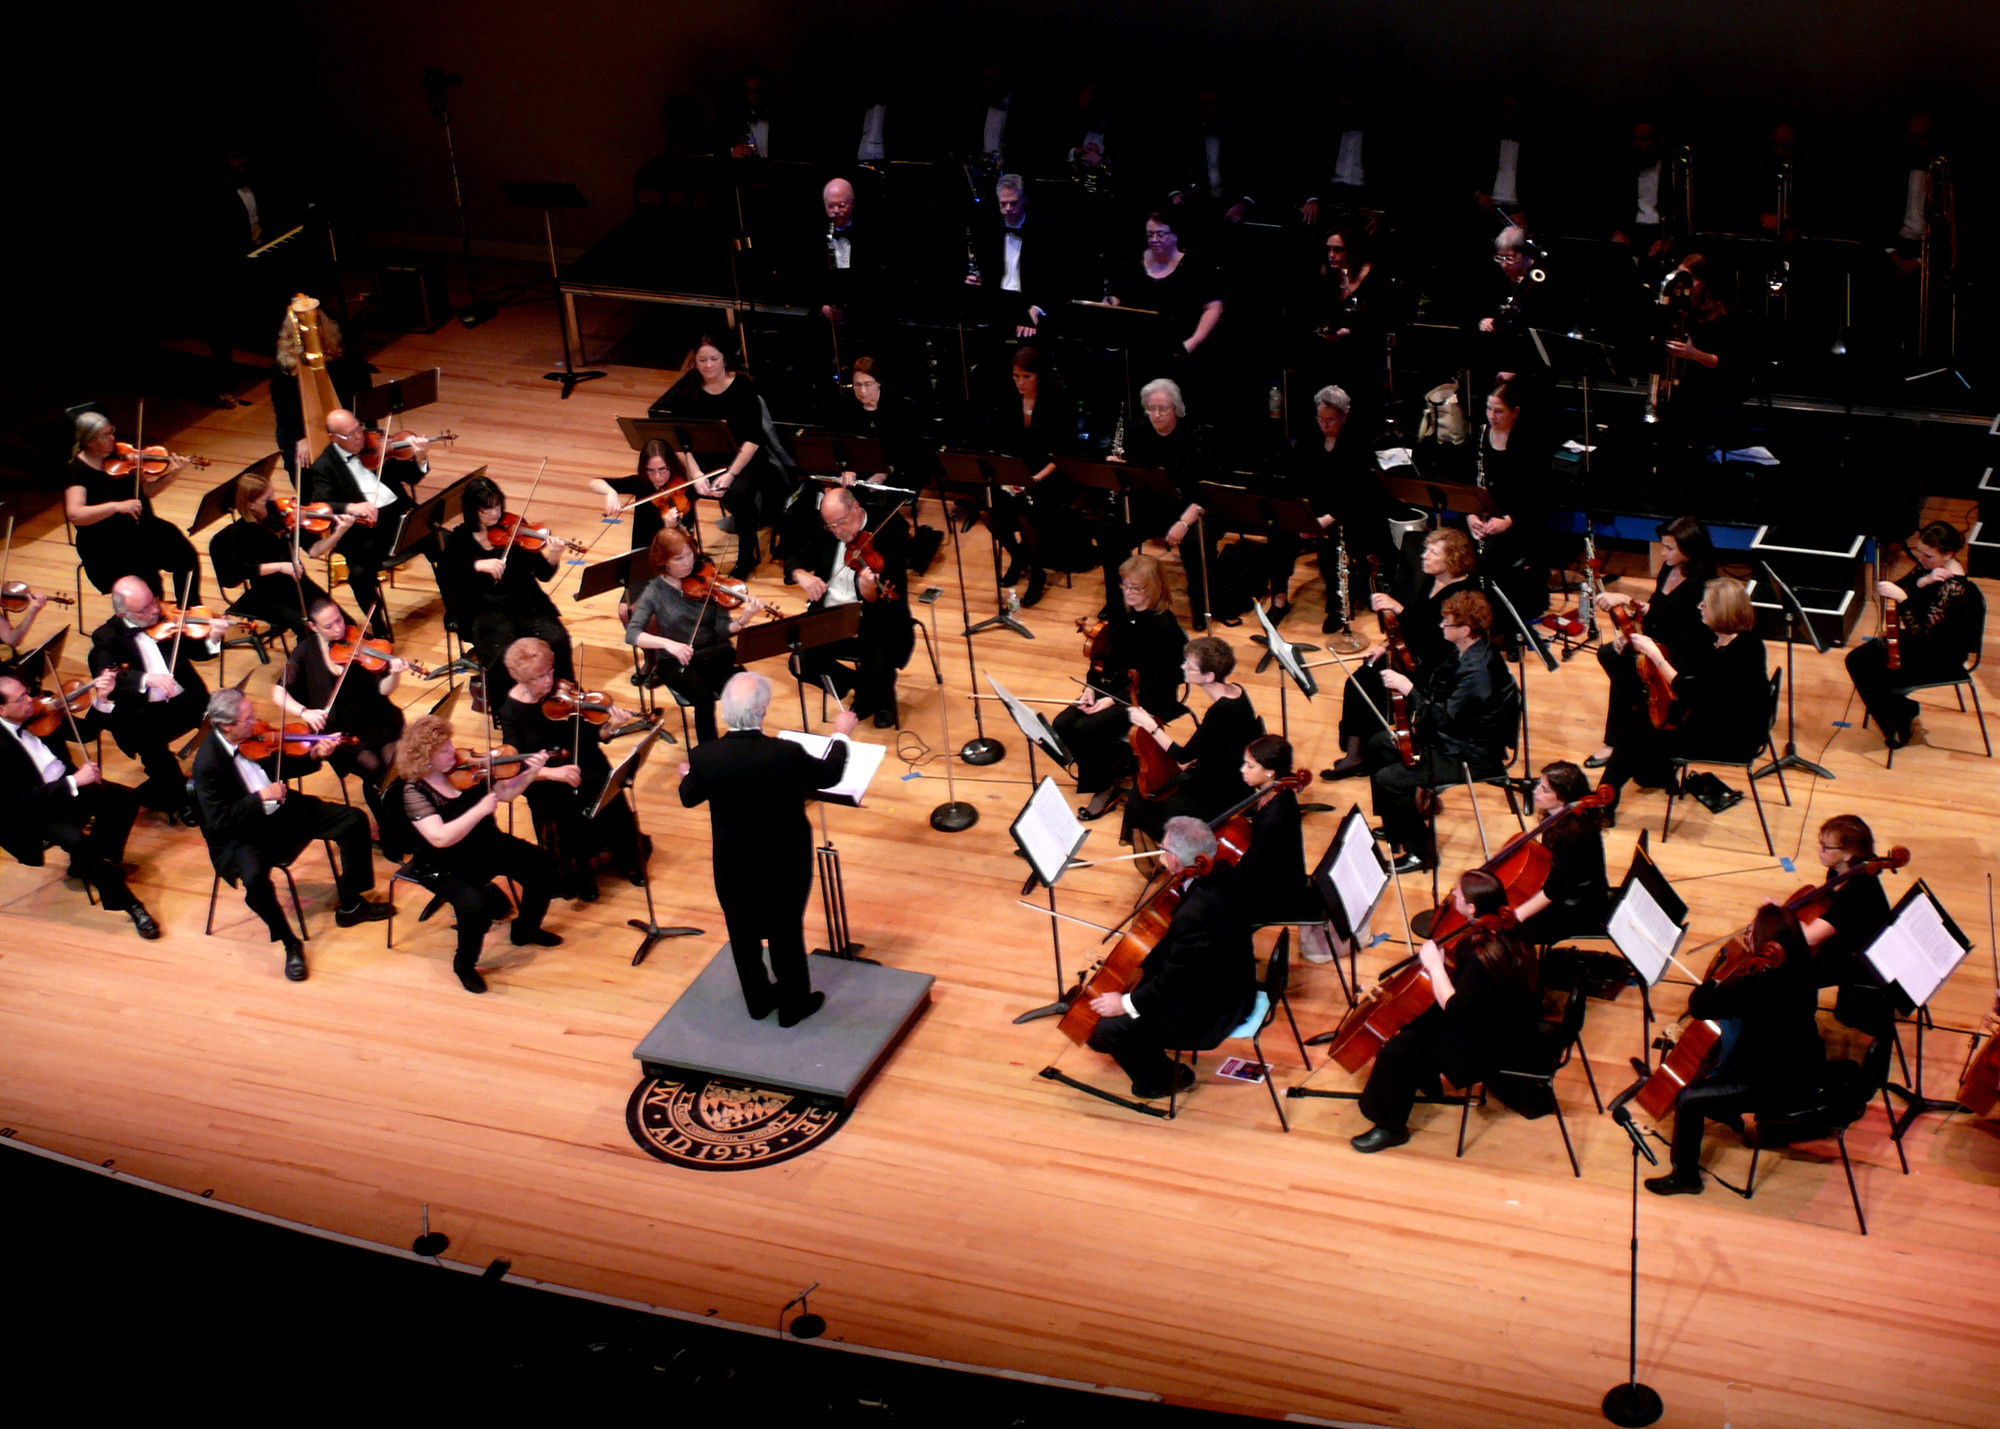 The South Shore Symphony performed at Molloy College in the Madison Theater on Saturday,   November 21, 2015.